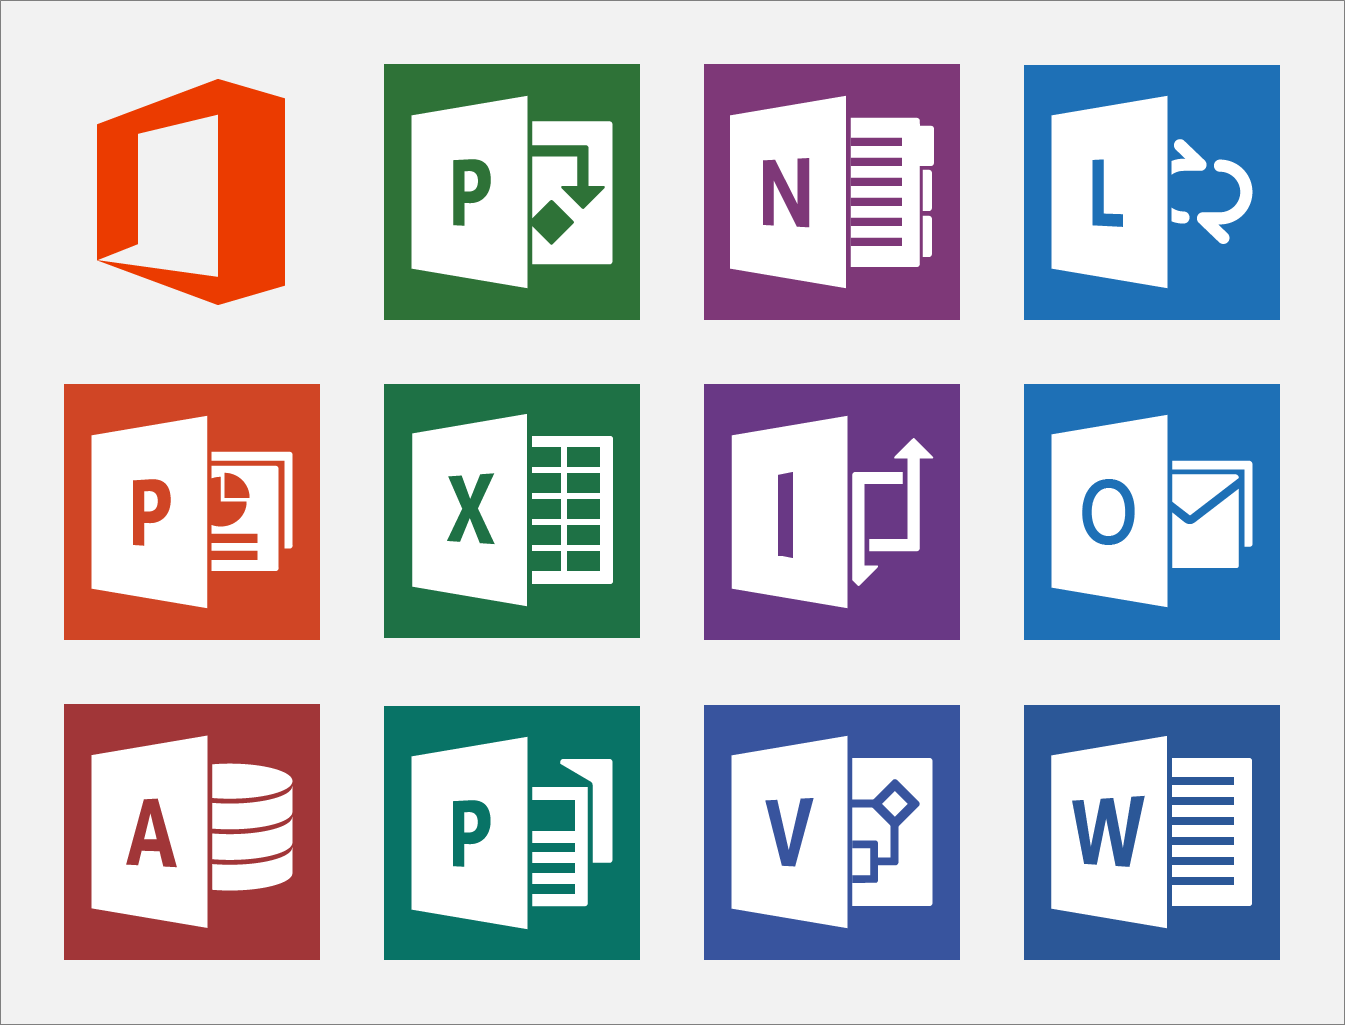 MS Office Suite Logo - Pin by Krystle Chanel on Infographics, Logos & Pictograms ...